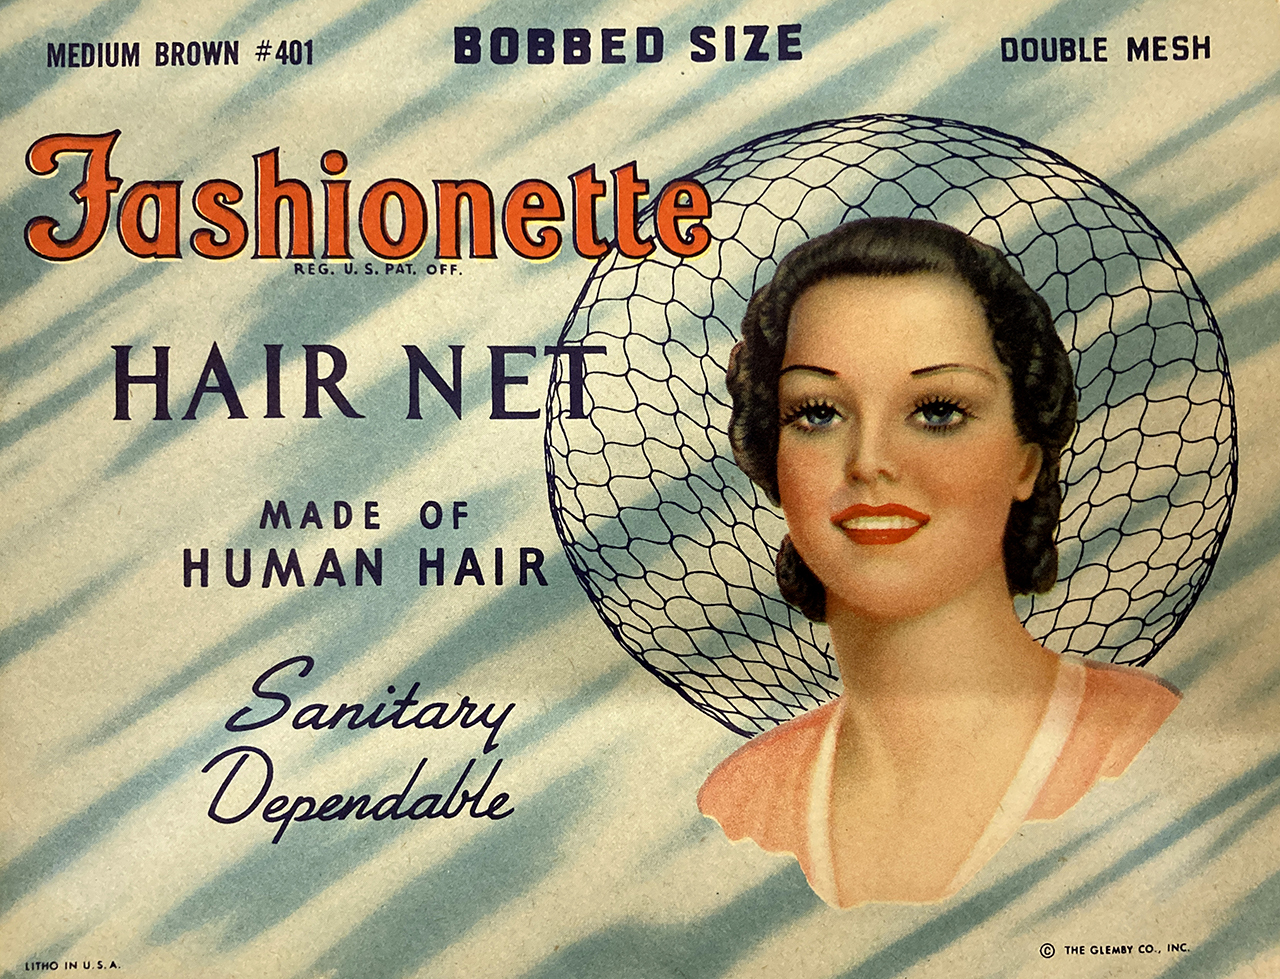 An early 20th century advertisement featuring a stylised portrait illustration of a white-skinned woman on the right hand-side. She has is smiling and has brown hair that is styled into soft waves and is wearing make-up. There is a flattened hairnet behind her head in a rounded shape to look like a halo. On the left-hand side of the advertisement, the words 'medium brown', 'bobbed sized', double mesh', 'Fashionette', 'hair net', 'made of human hair' and 'sanitary dependable' are included.